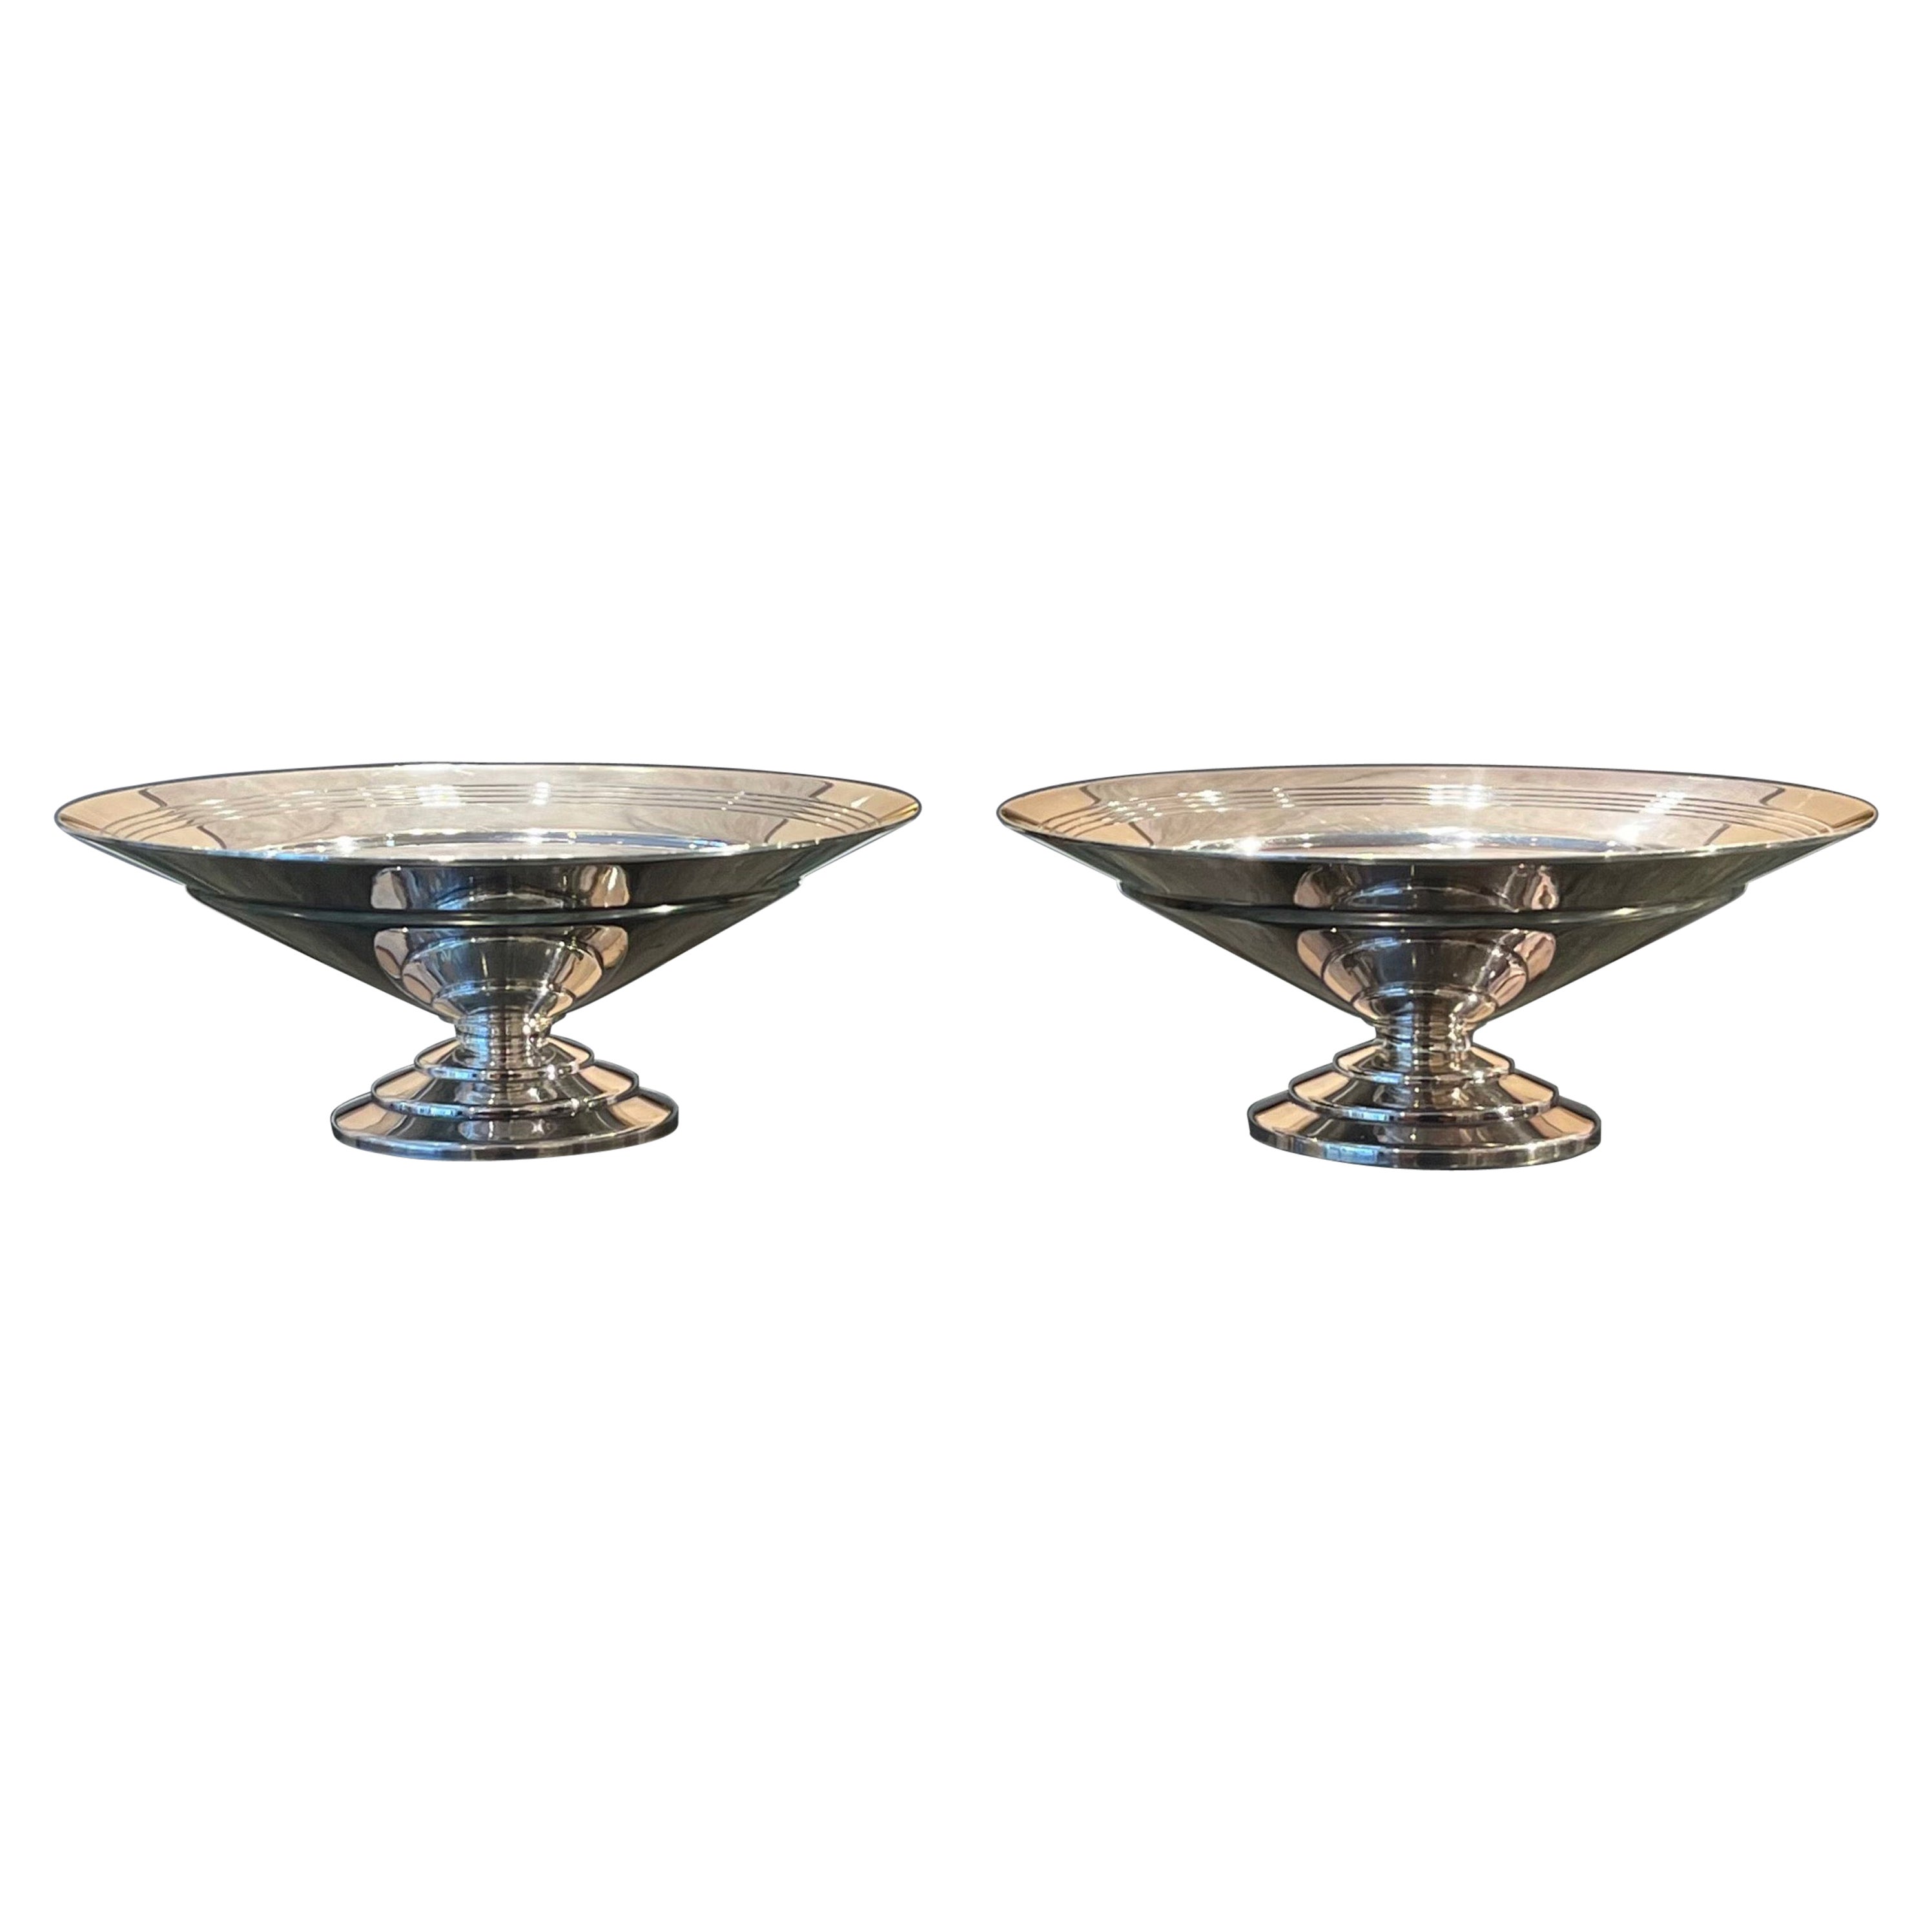 Two 1930s Art Deco Dishes in Prince's Plate by Keith Murray for Mappin & Webb For Sale